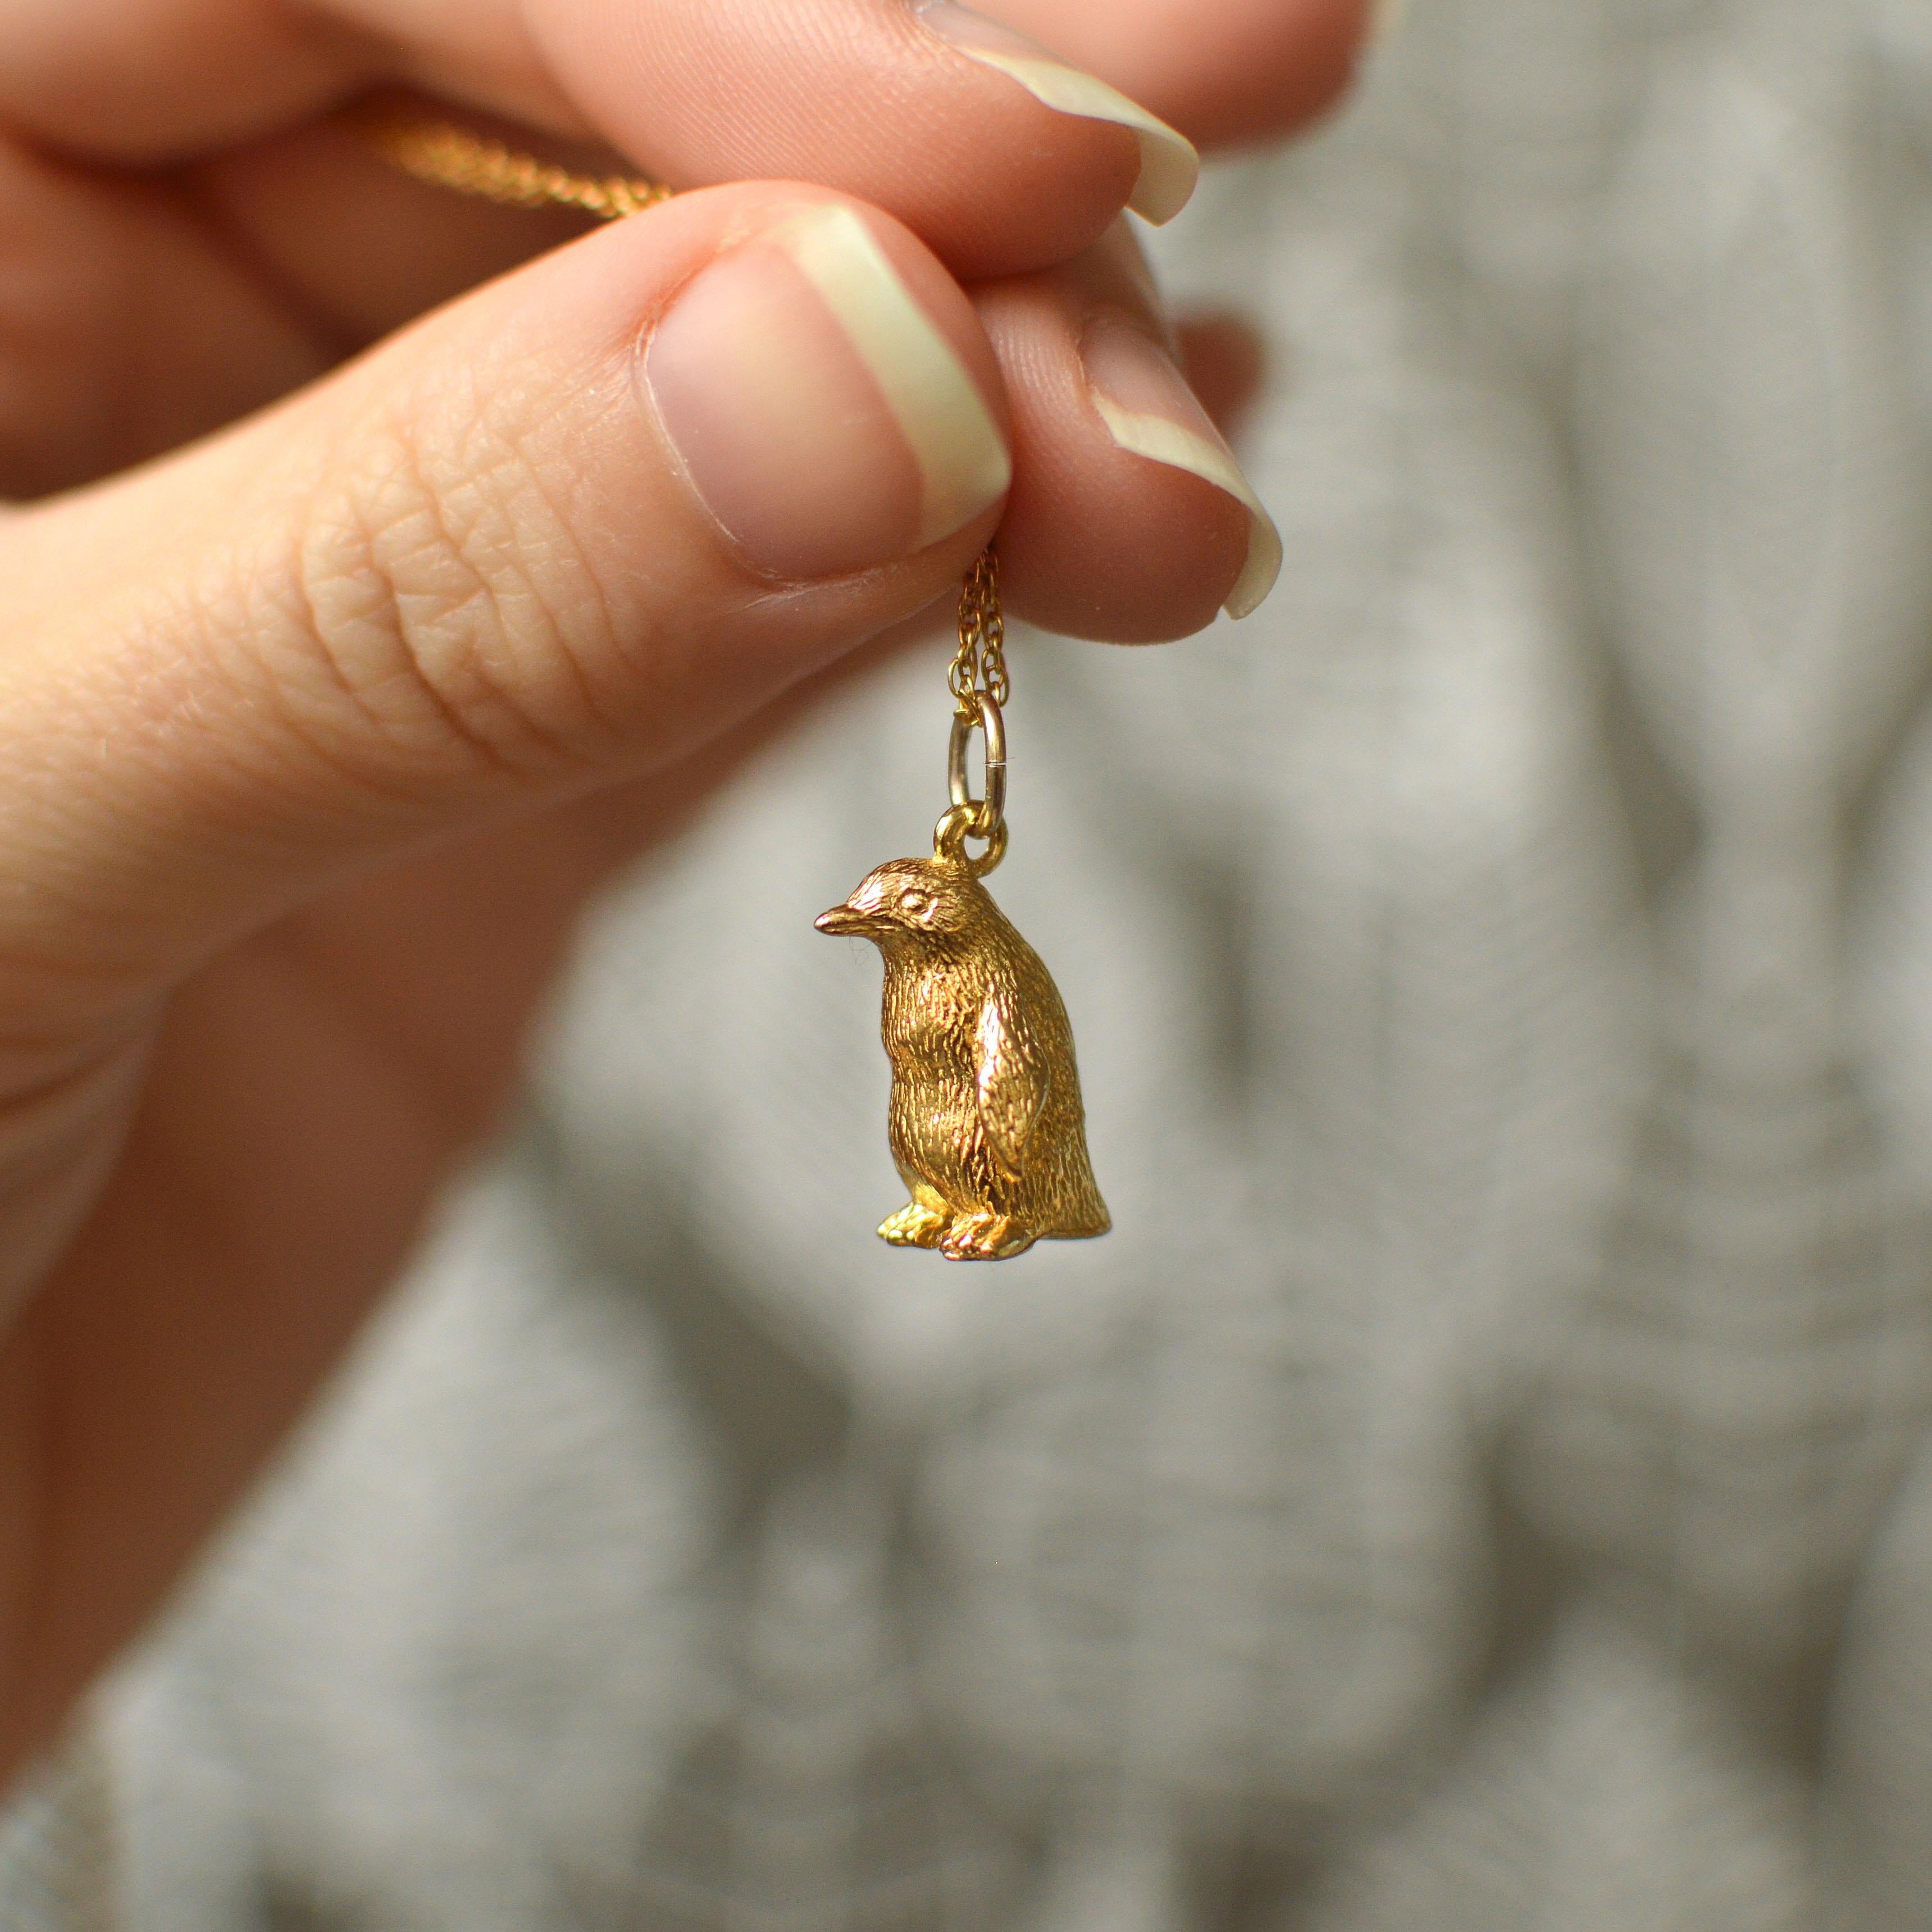 This penguin pendant is based on a gentoo penguin. It is cast in solid 18 Carat gold and finished by hand, and is created from Lucy's original hand-sculpted design. 

This penguin pendant is made in London, United Kingdom using recycled or Fairtrade